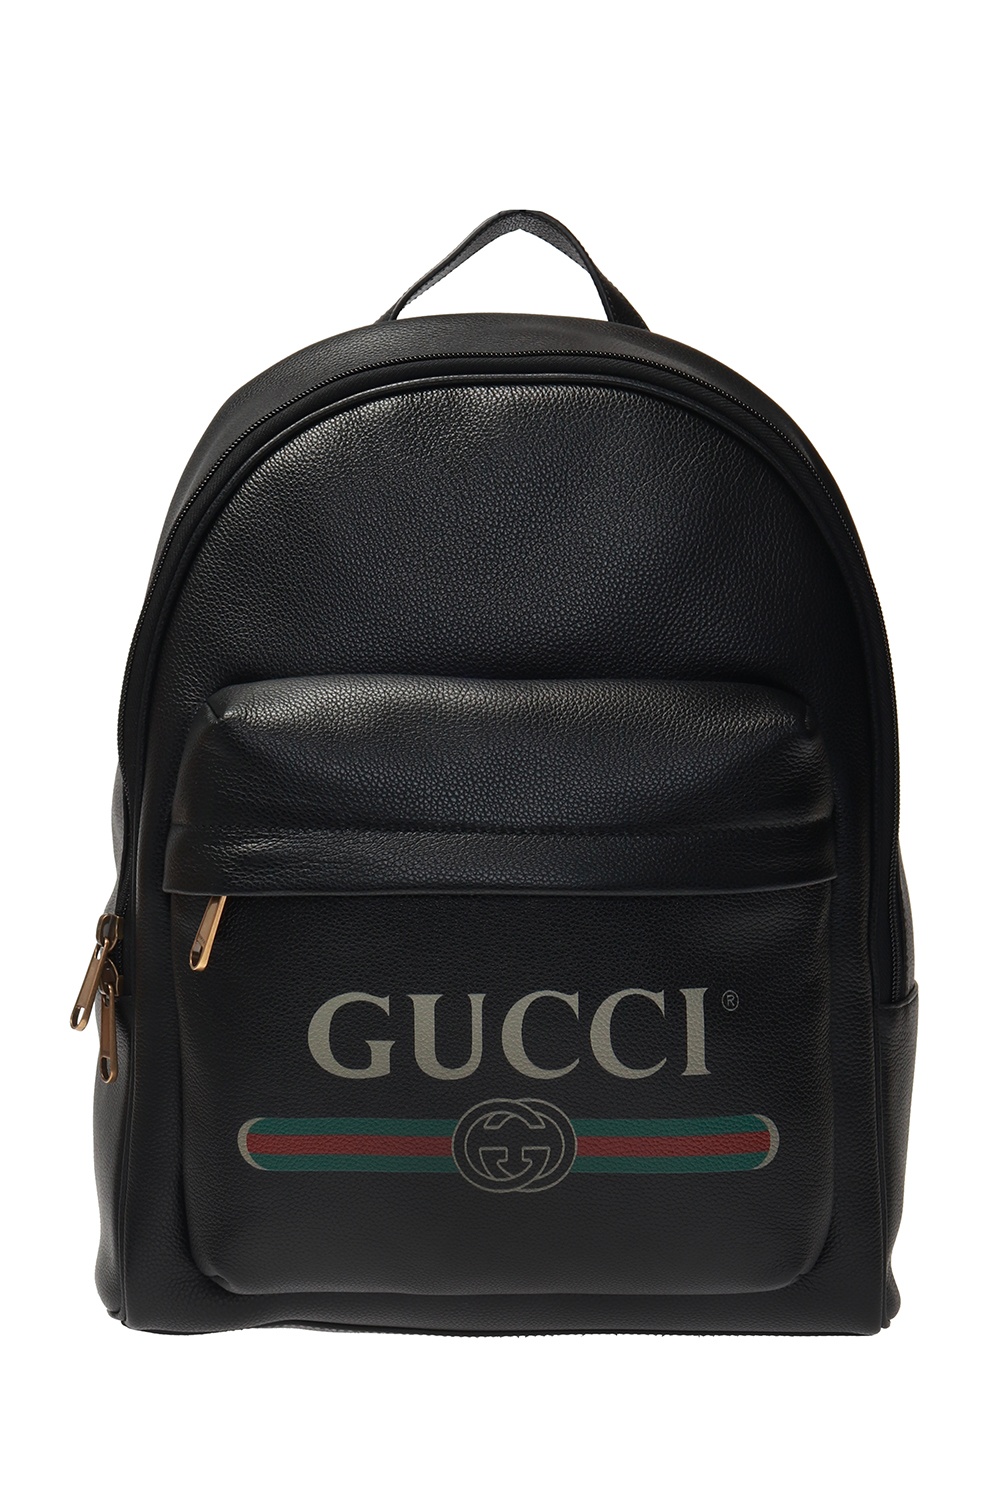 how much do gucci backpacks cost